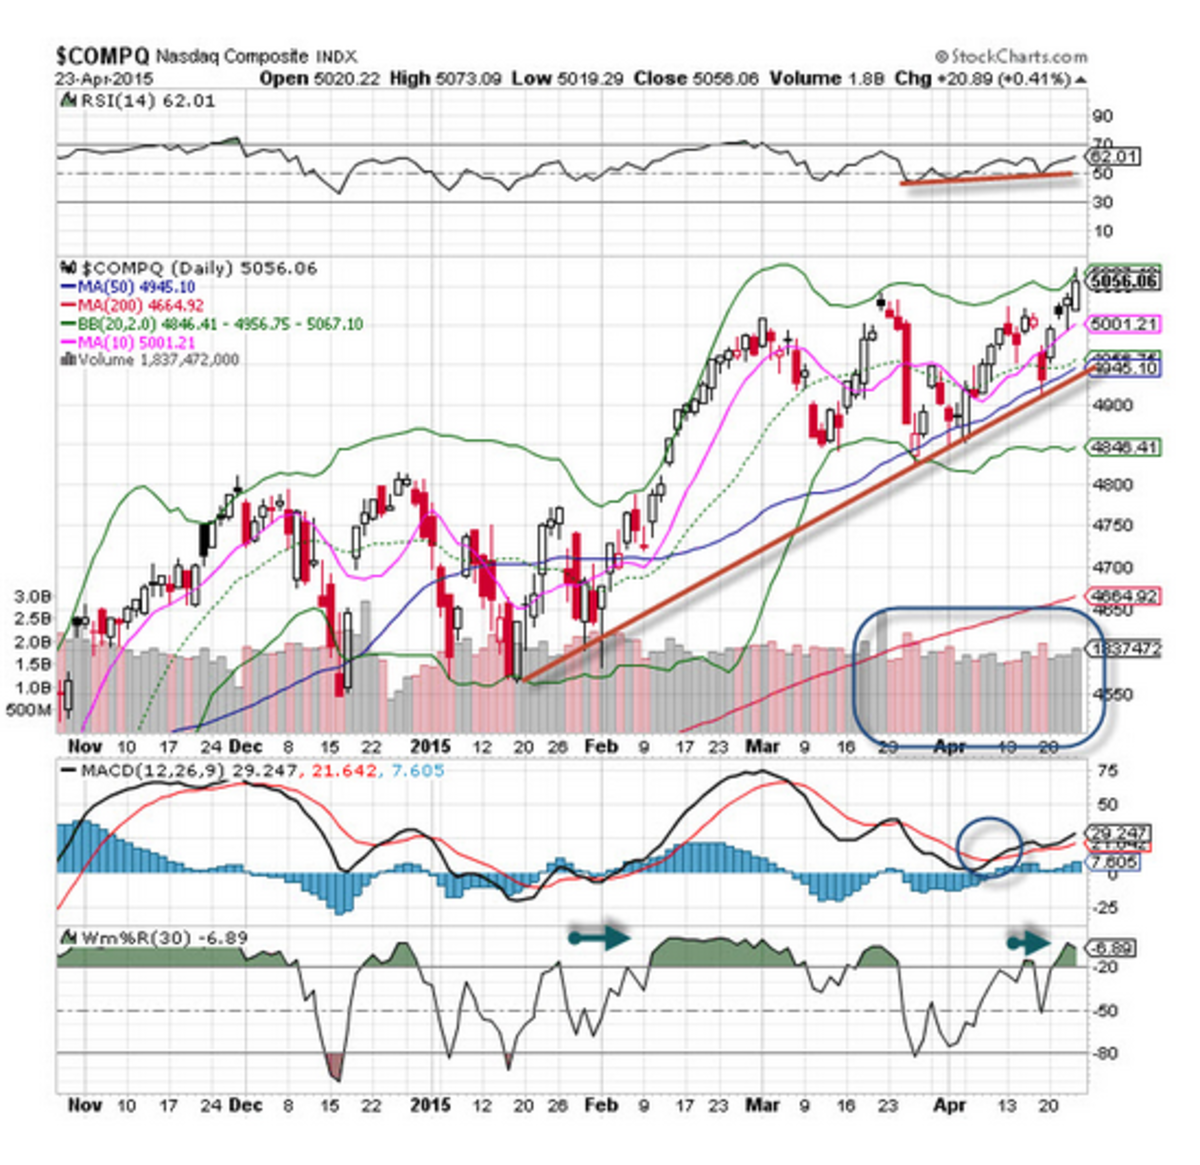 The Nasdaq Composite Index (^IXIC) is Today's 'Chart of the Day